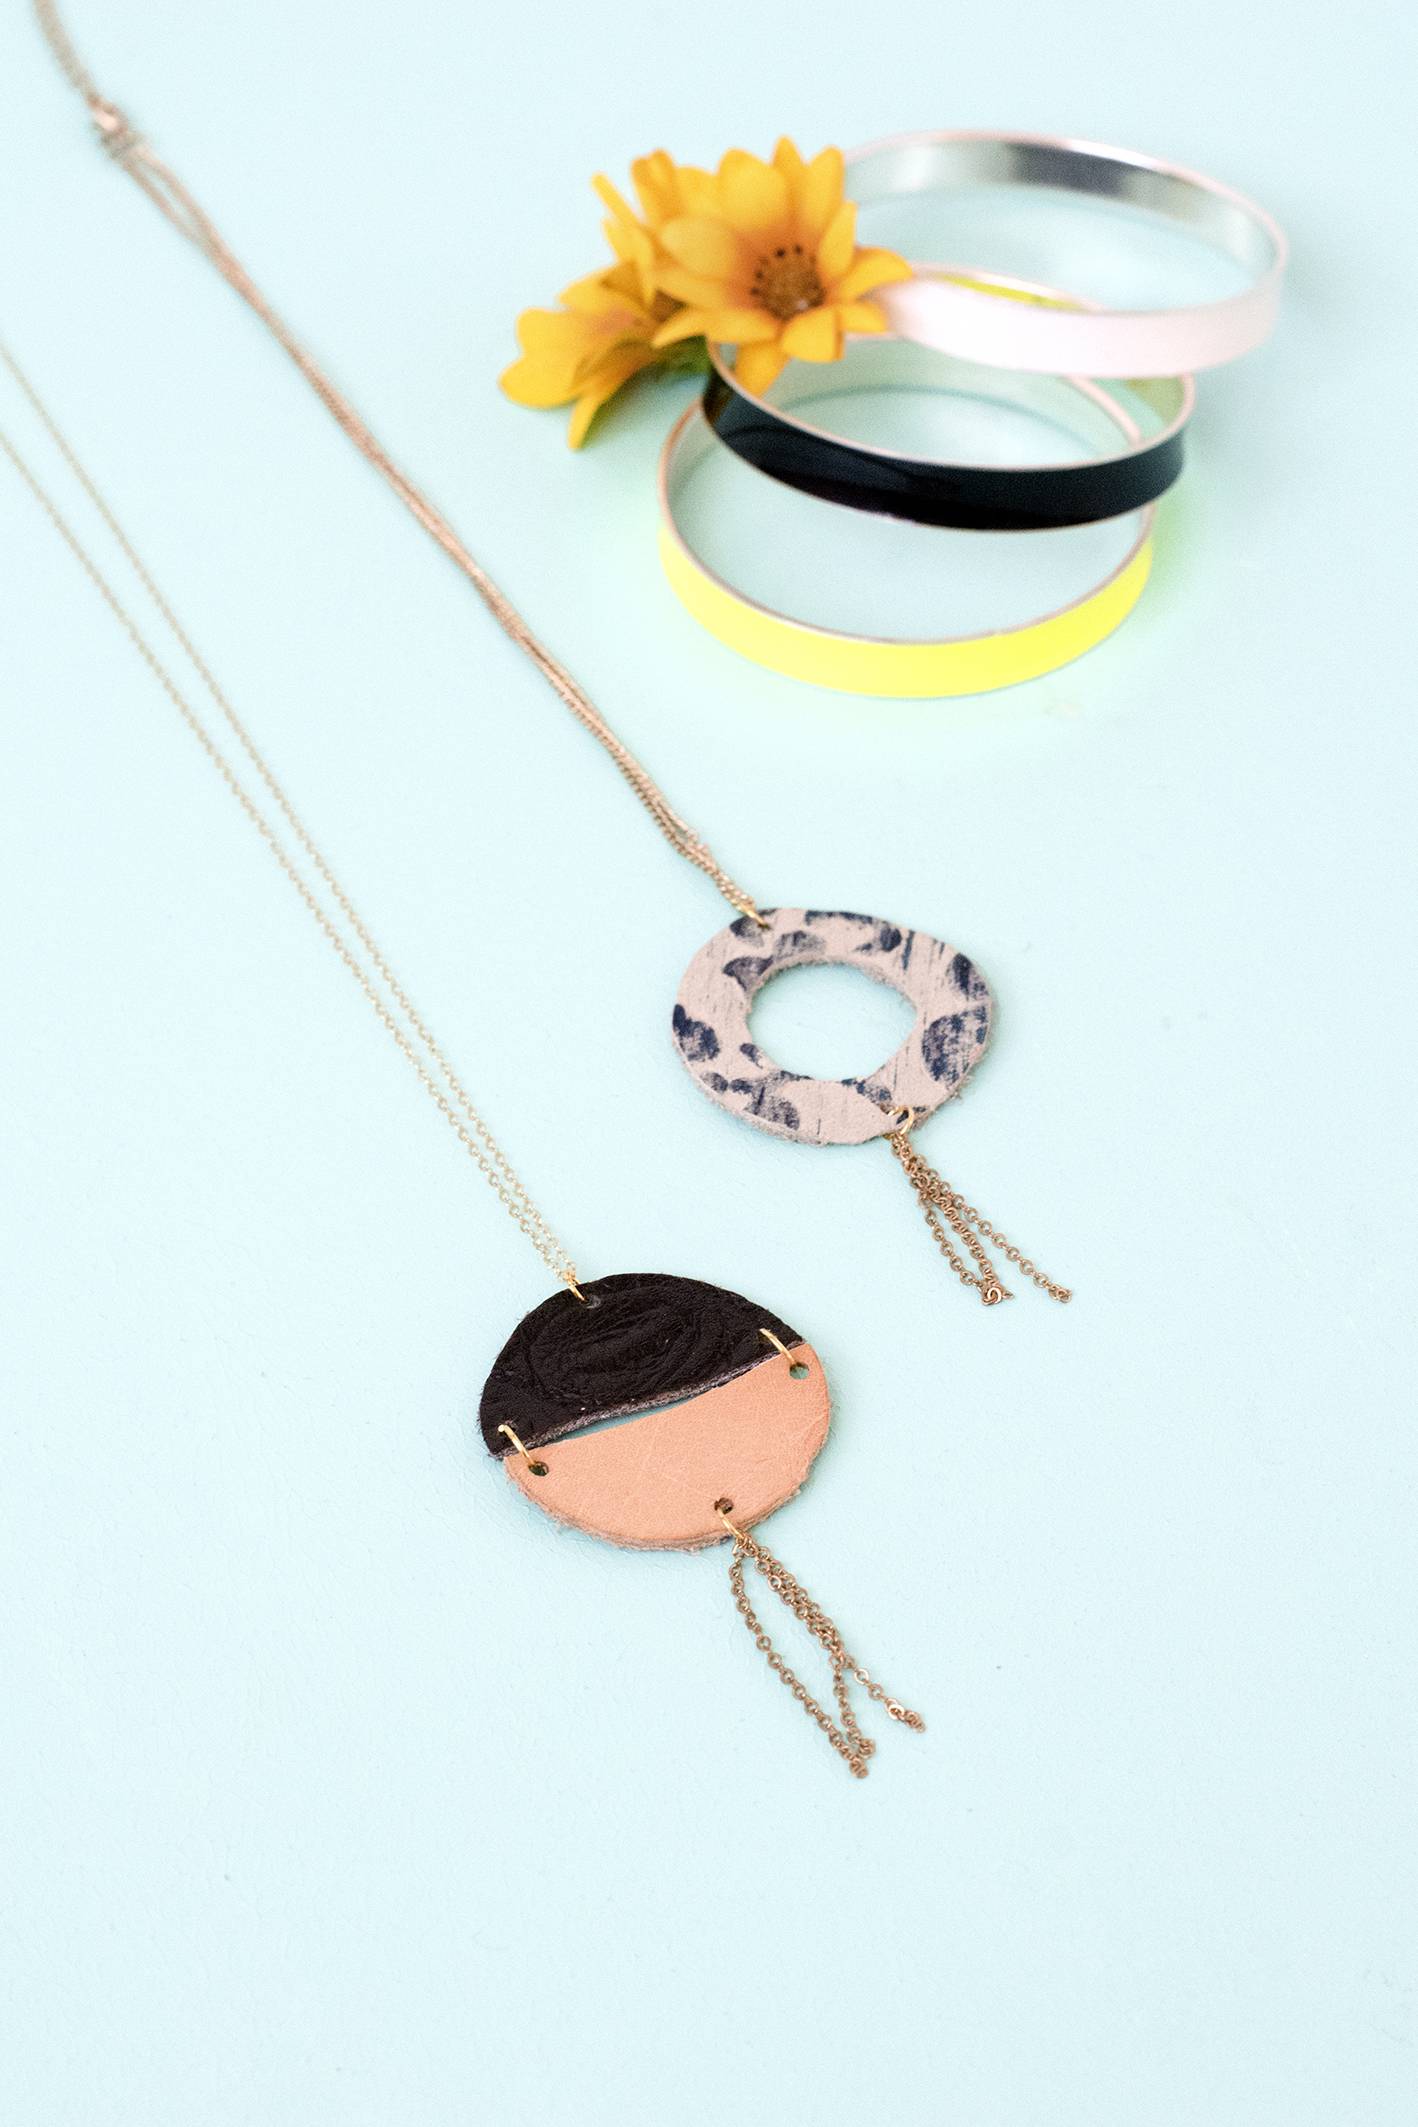 Circular leather pendants on a chain